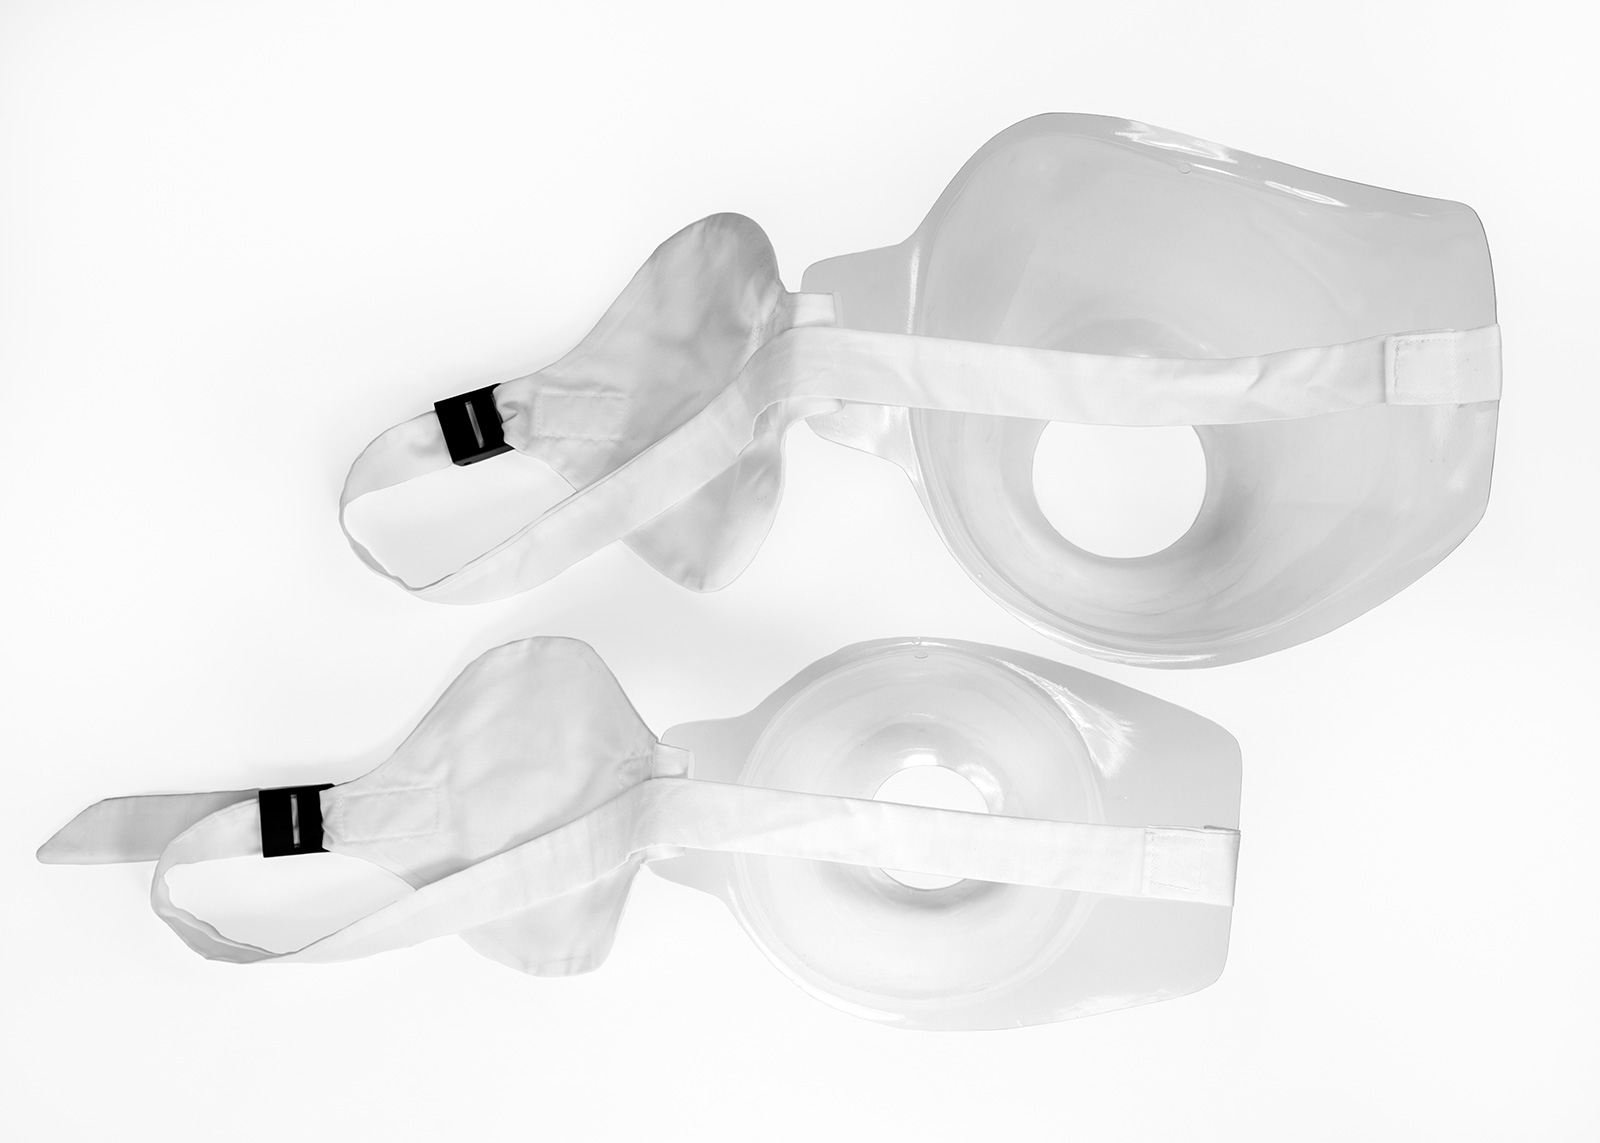 The Treatment Brassiere - Radiology Support Devices Inc.